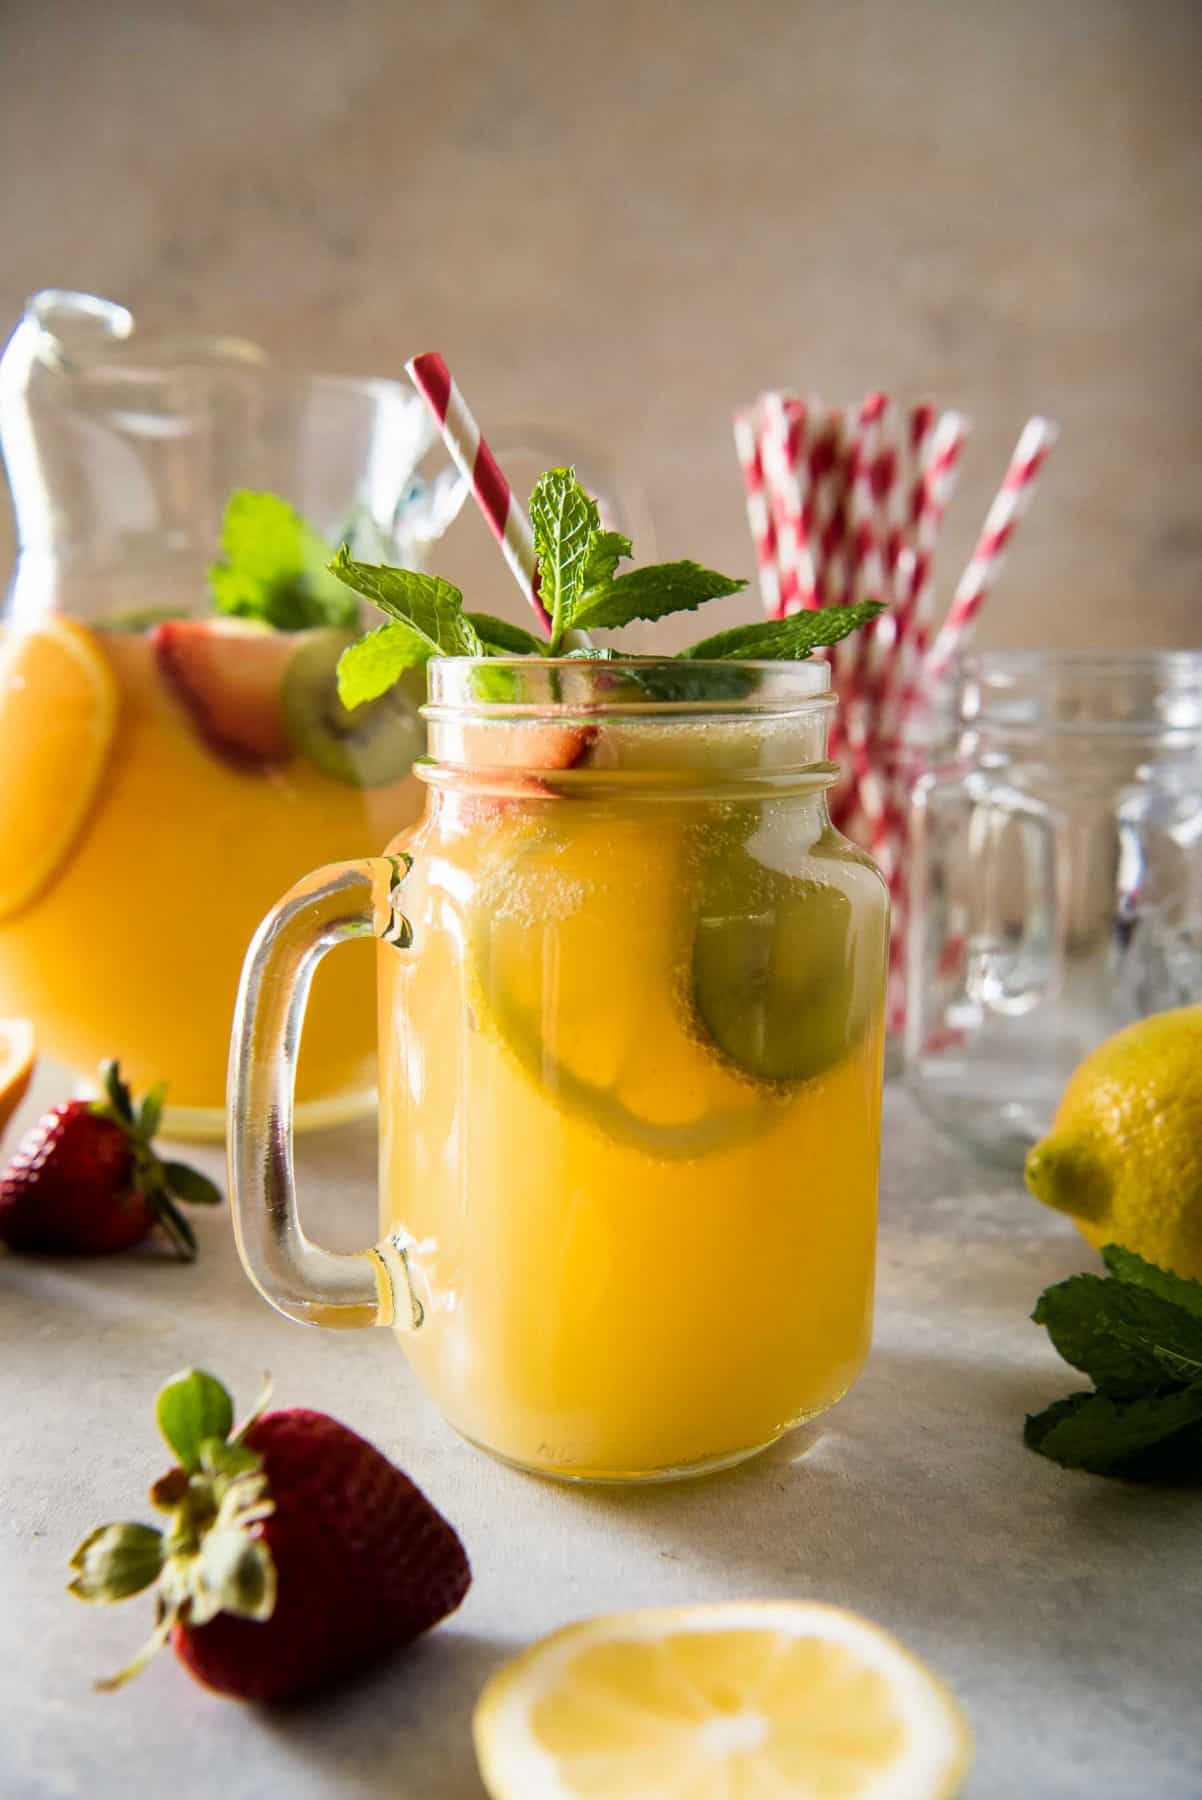  Cool down these hot summer days with a pitcher of Orange Lemonade Twist Punch! Fizzy, spicy, and fruity, this refreshing drink is sure to wow your friends & family!